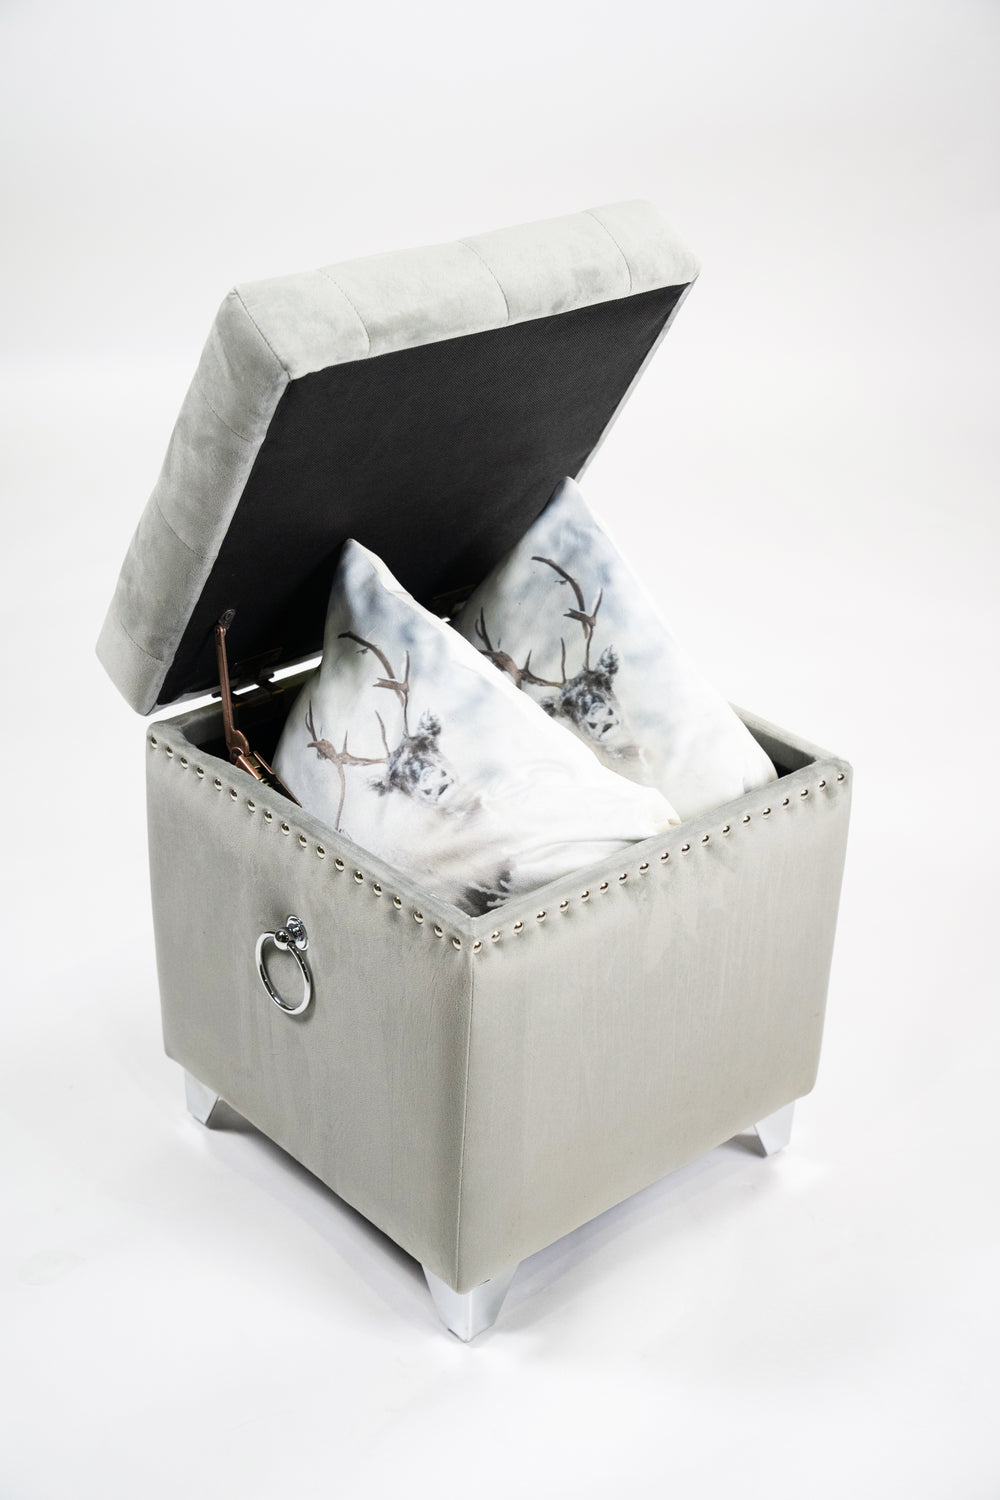 Grey Velvet Button-Tufted Storage Ottoman With  Nailhead Trim, Pull Ring, And Metal Legs HI-LINE GIFT LTD.